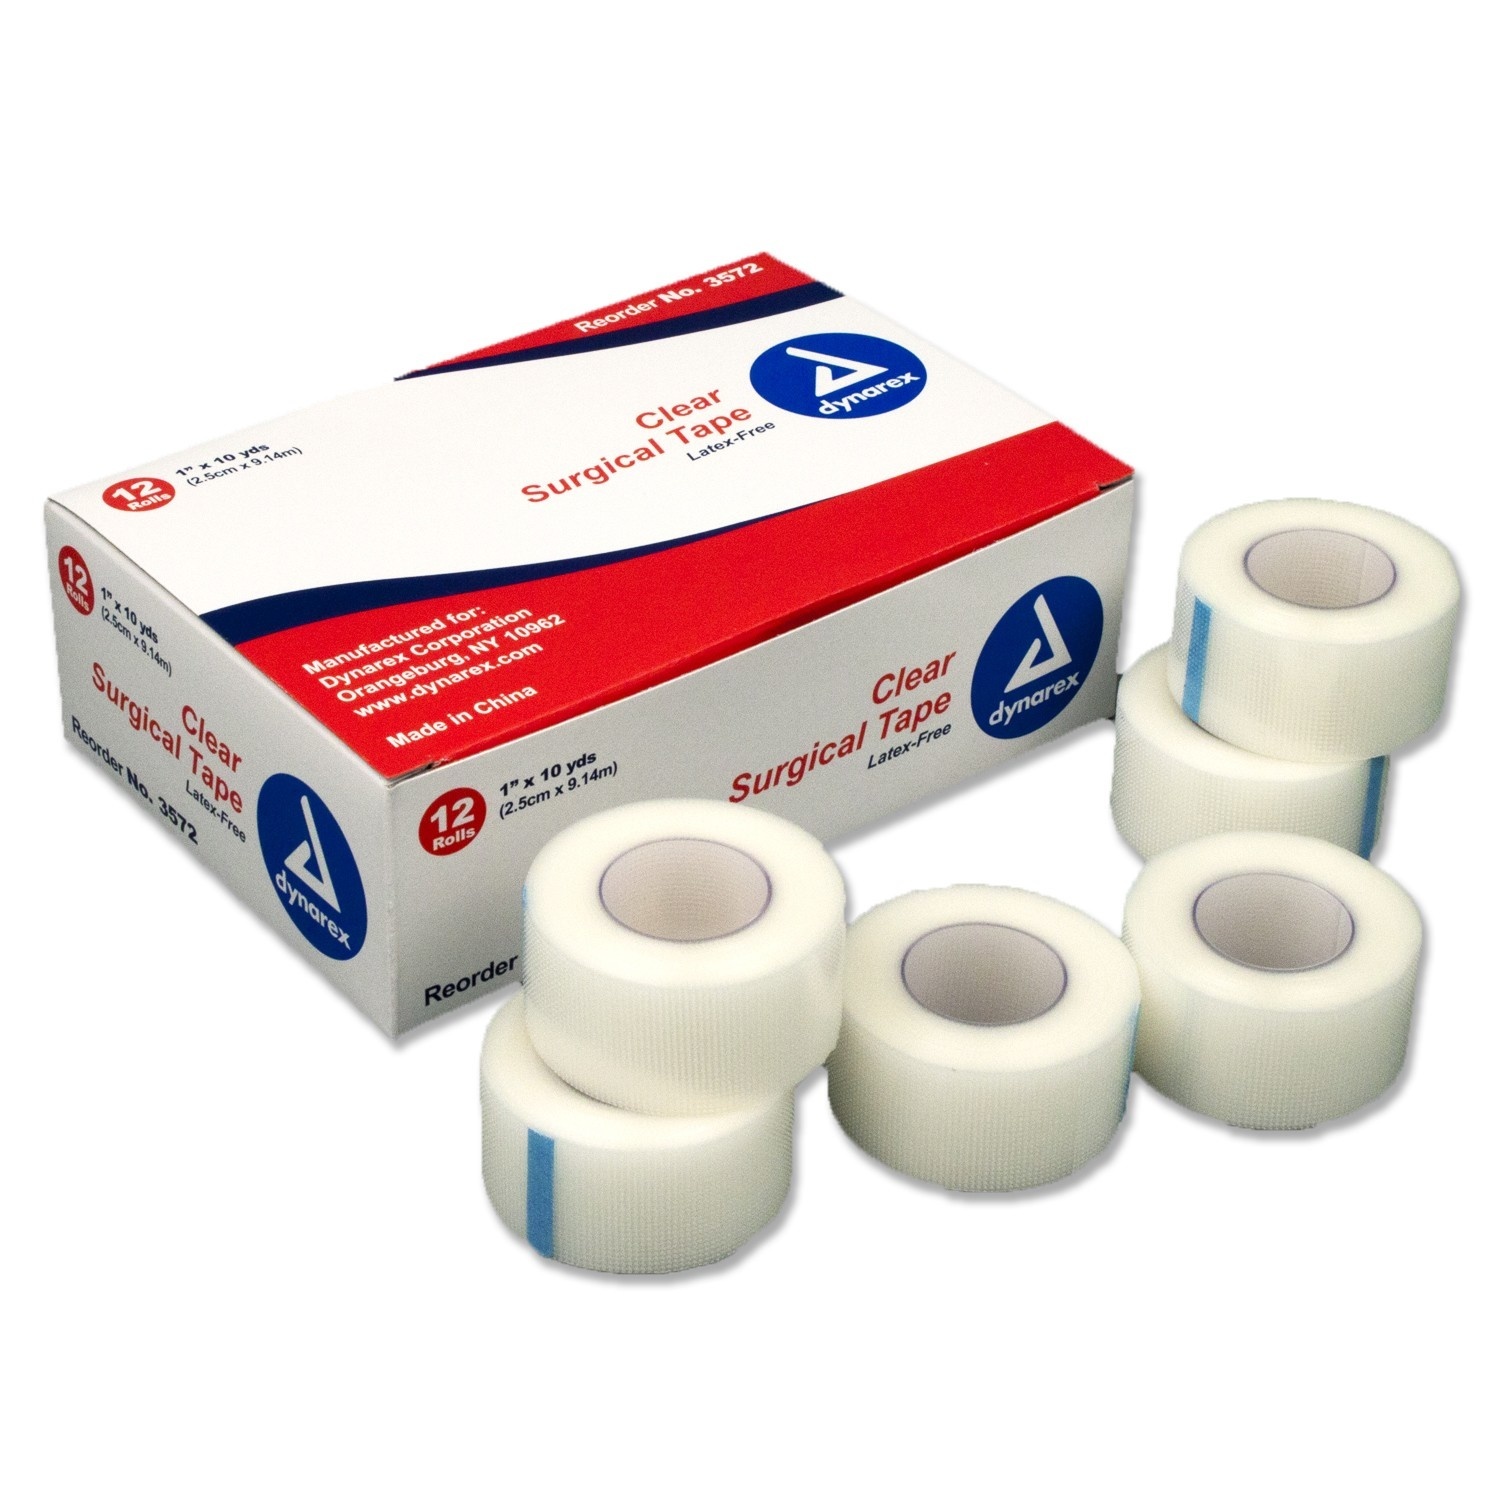 Dynarex Surgical Tape Clear 1” x 10yrds